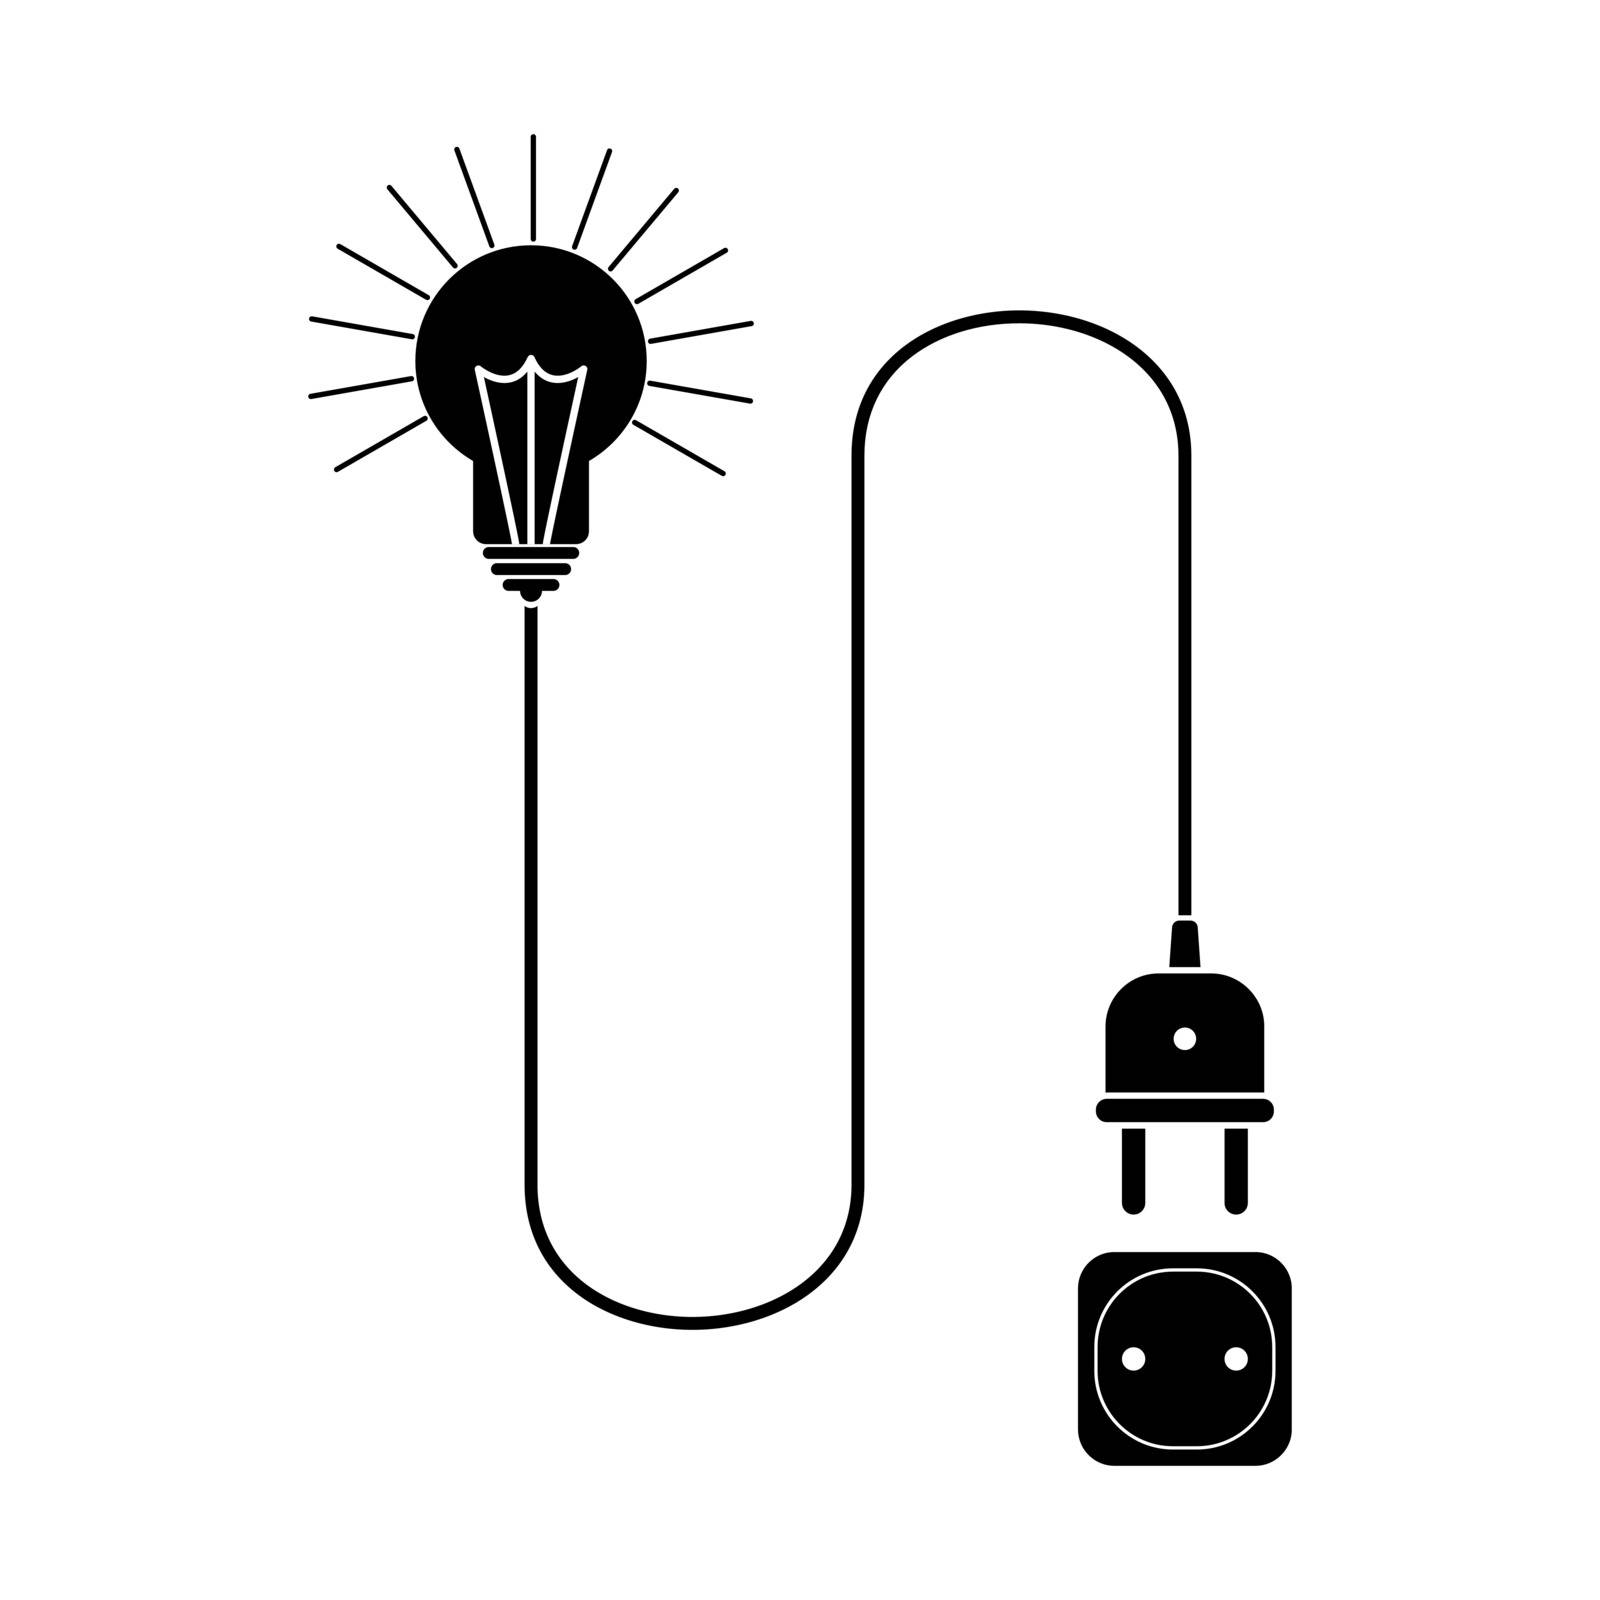 light bulb with a wire and a plug is connected to an electrical outlet